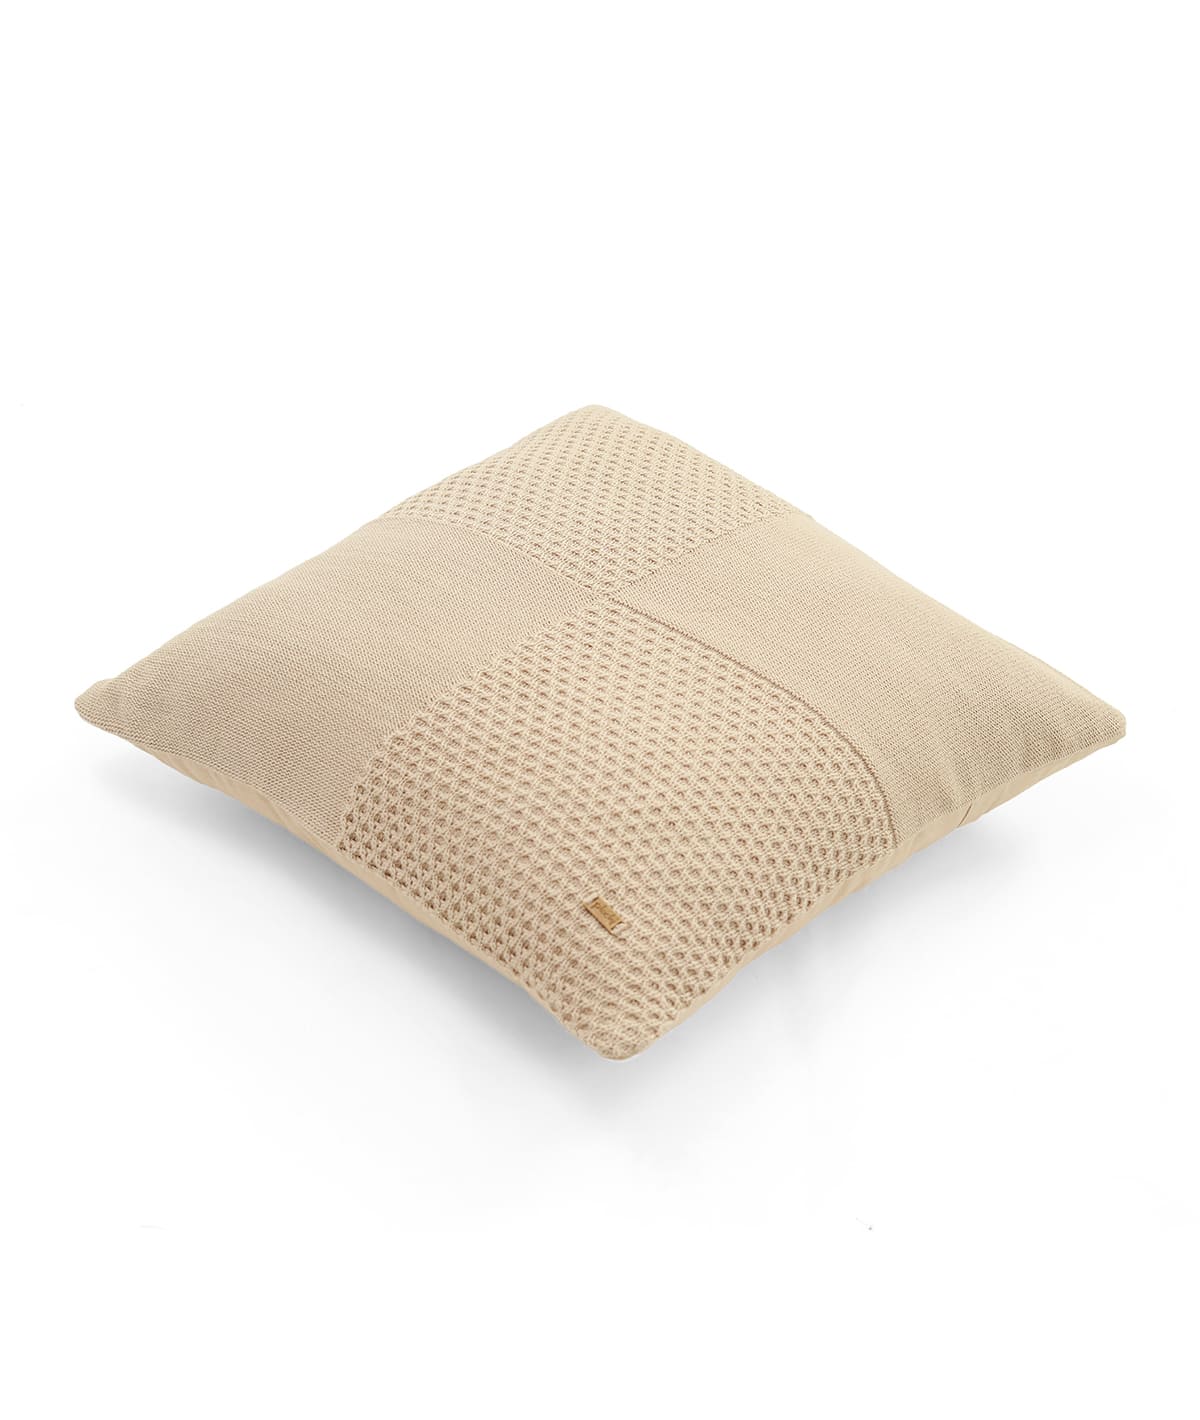 buy online Cushion covers